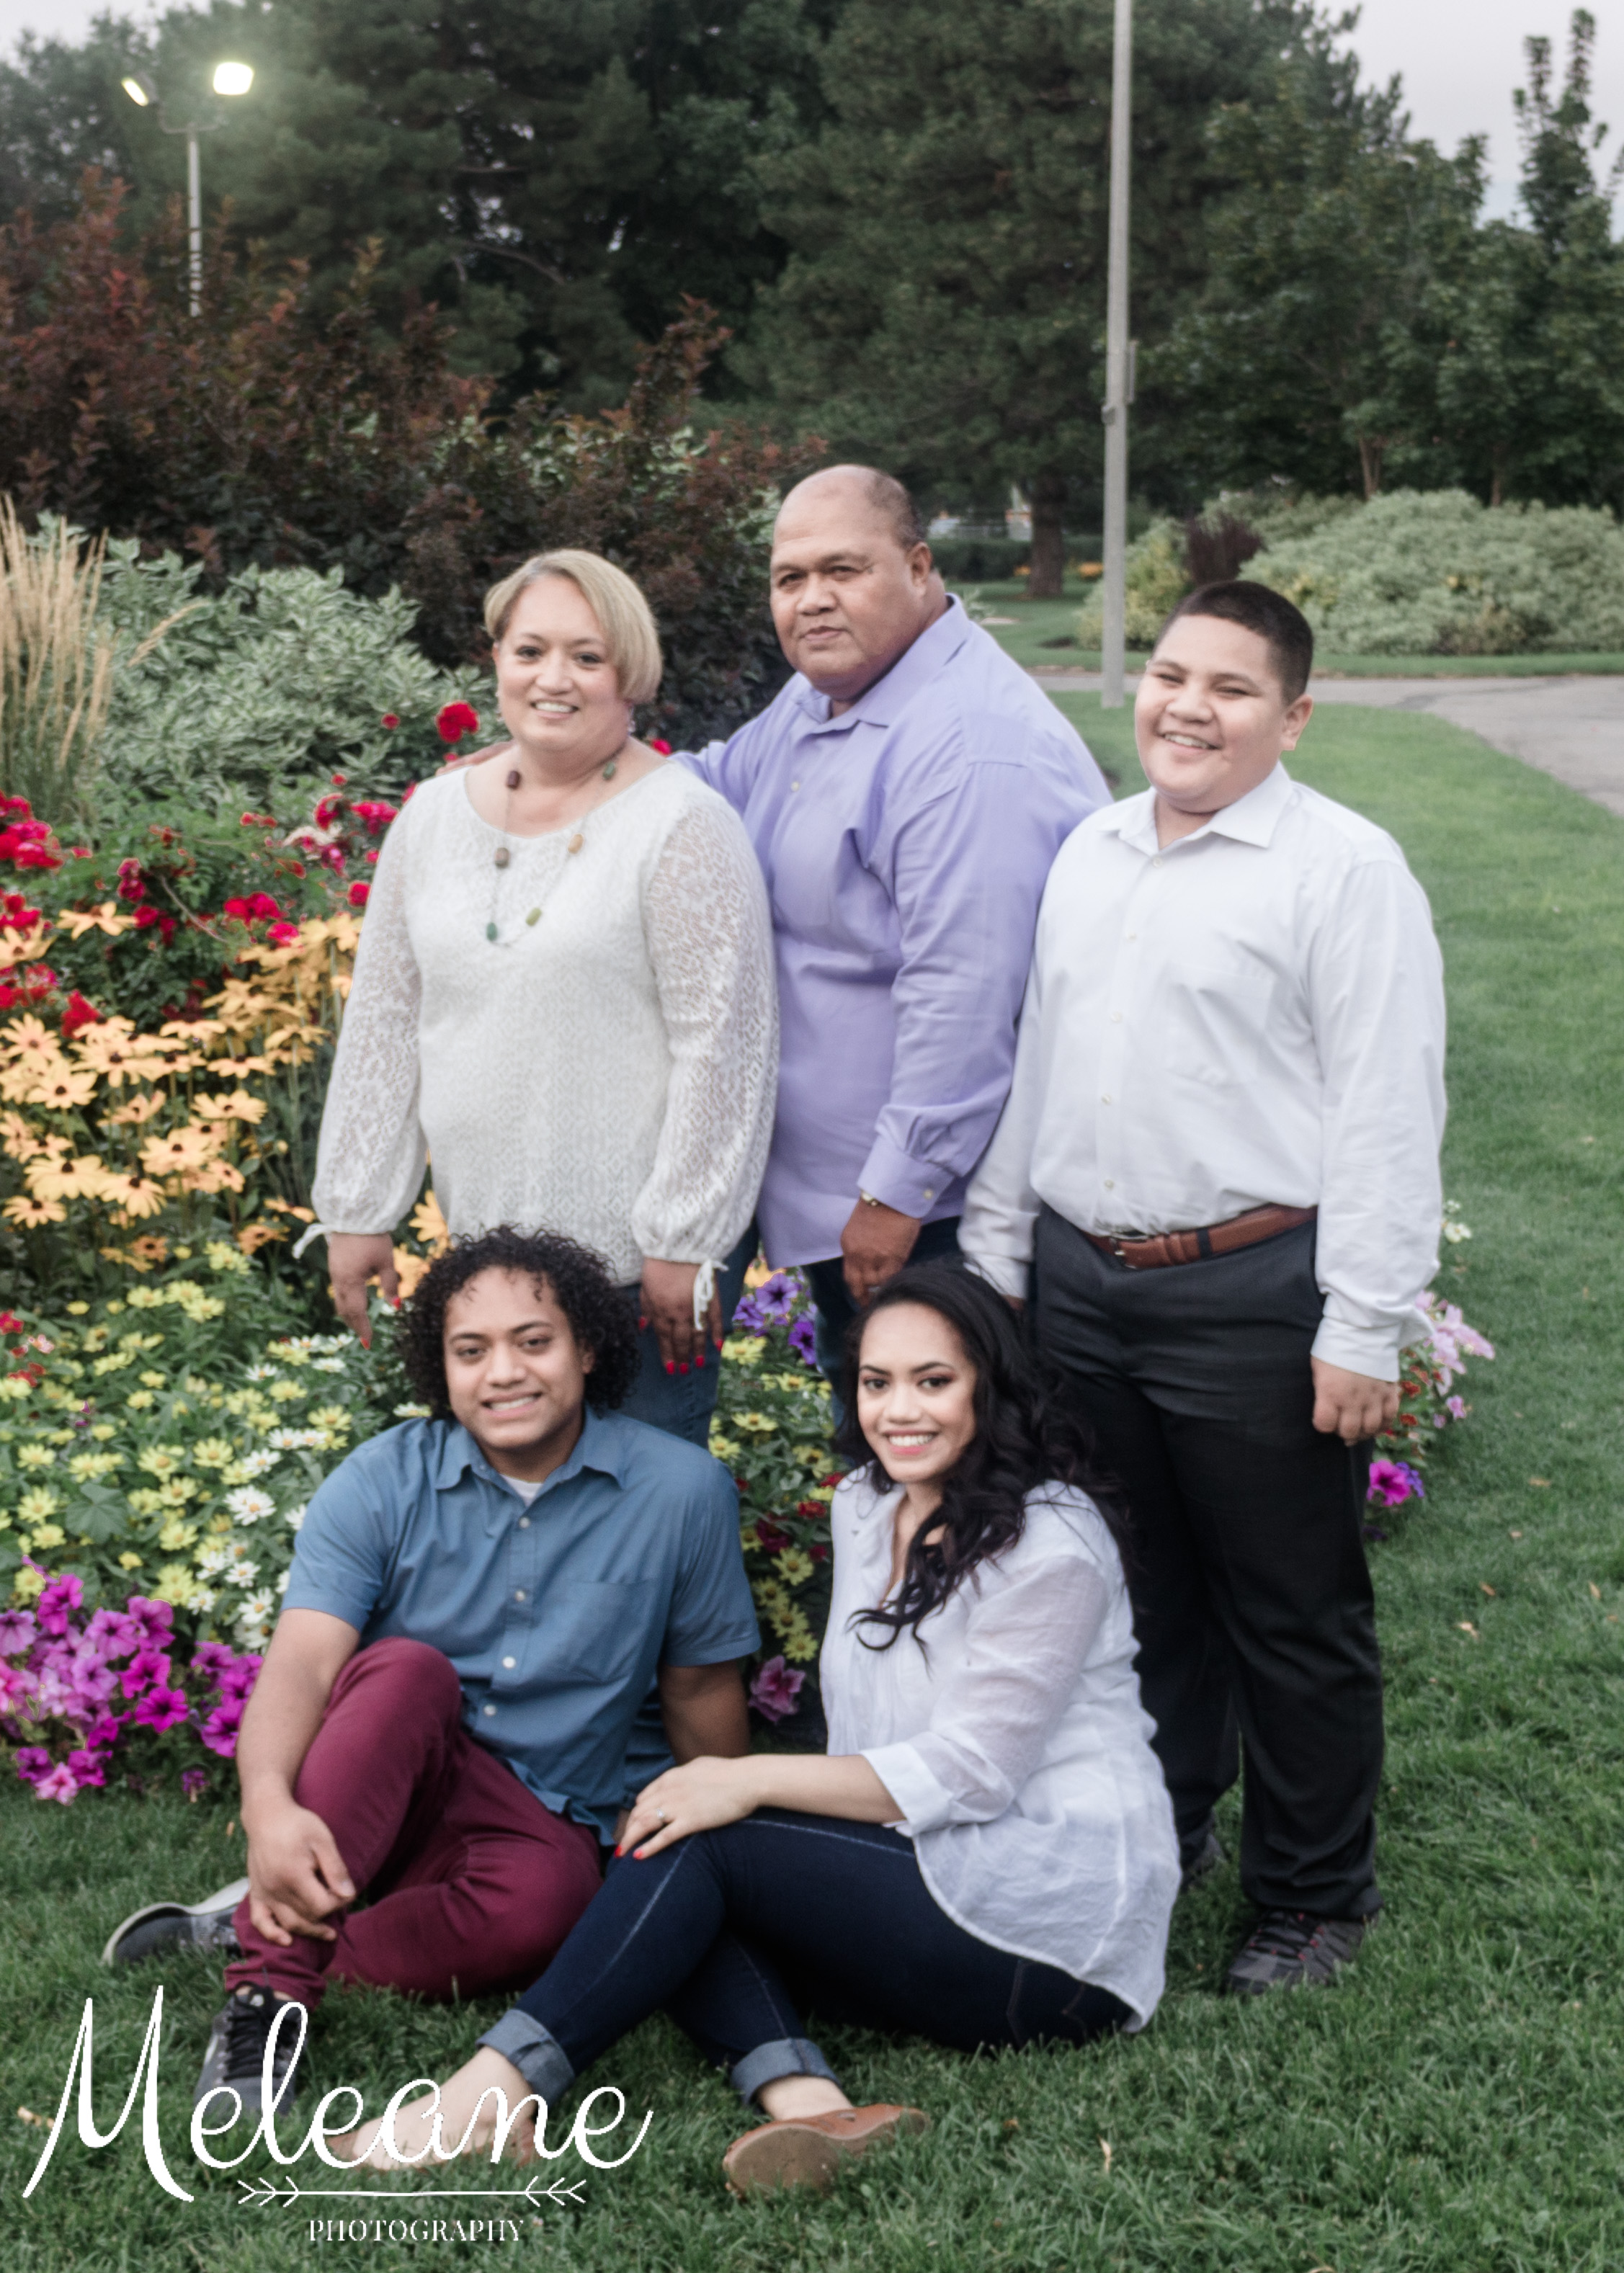 Finding Joy in the Journey with My Blended Family